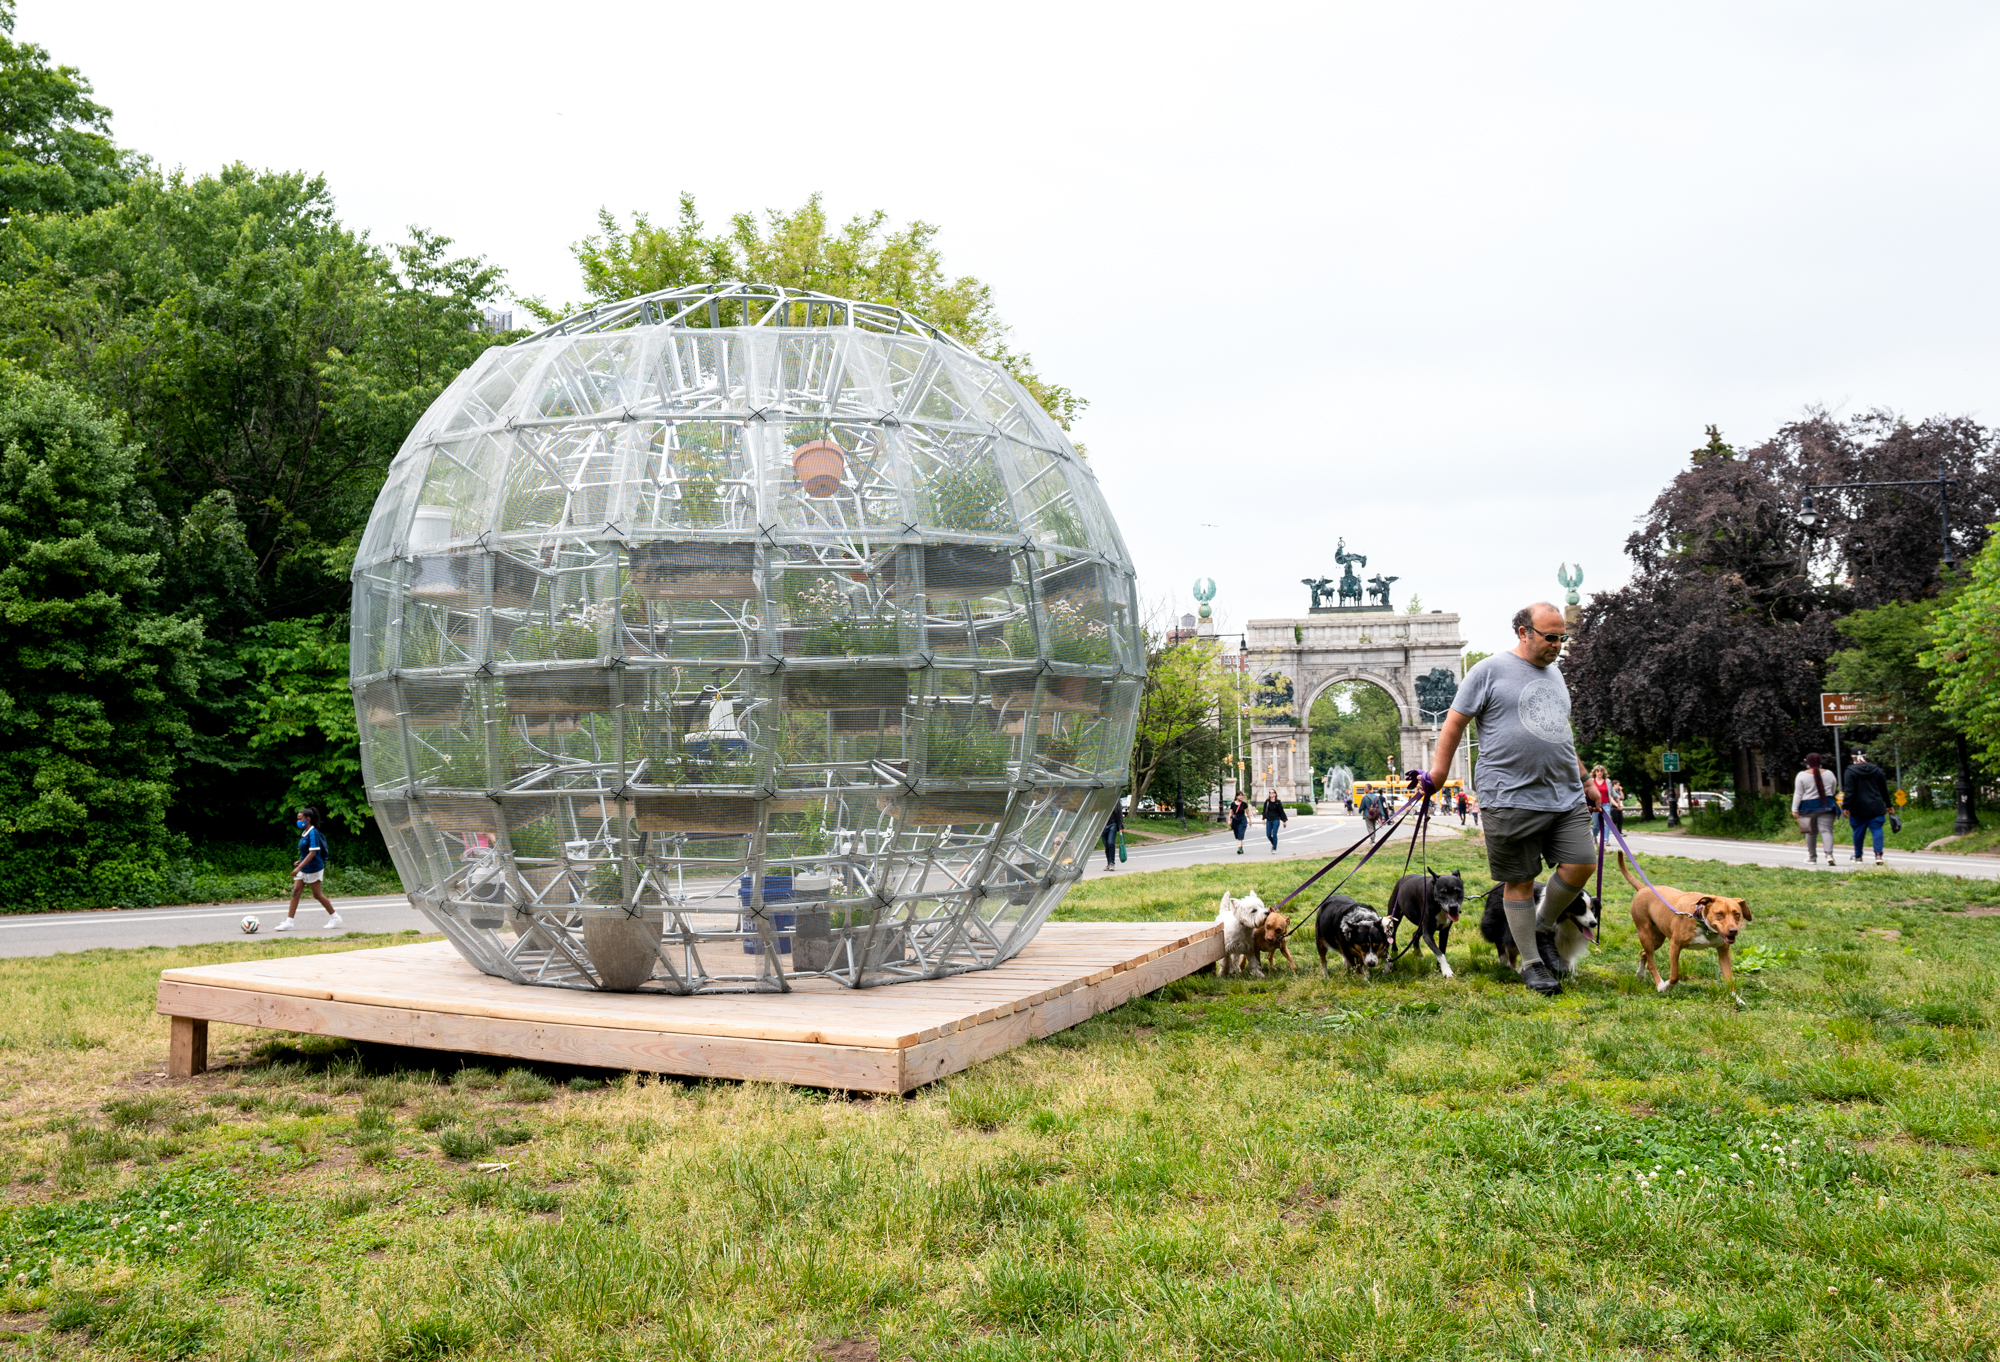 A geodesic sphere sculpture stands in a green patch of grass at the entrance to Prospect Park, with the grand stone gates of Grand Army Plaza in the background. The sphere is sitting on a wood platform and one man walks past it walking a pack of dogs of all sizes on leashes. The sculpture looms at least a few feet above his head. The sculpture is a large sphere made of metal bars covered in a steel mesh skin. Inside there are clear tubs attached to the walls and skeleton of the sphere that have brown soil, rocks, and plants inside of them. In the background stands the Grand Army Plaza stone gates and a stretch of green grass inbetween the sculpture and the gates.